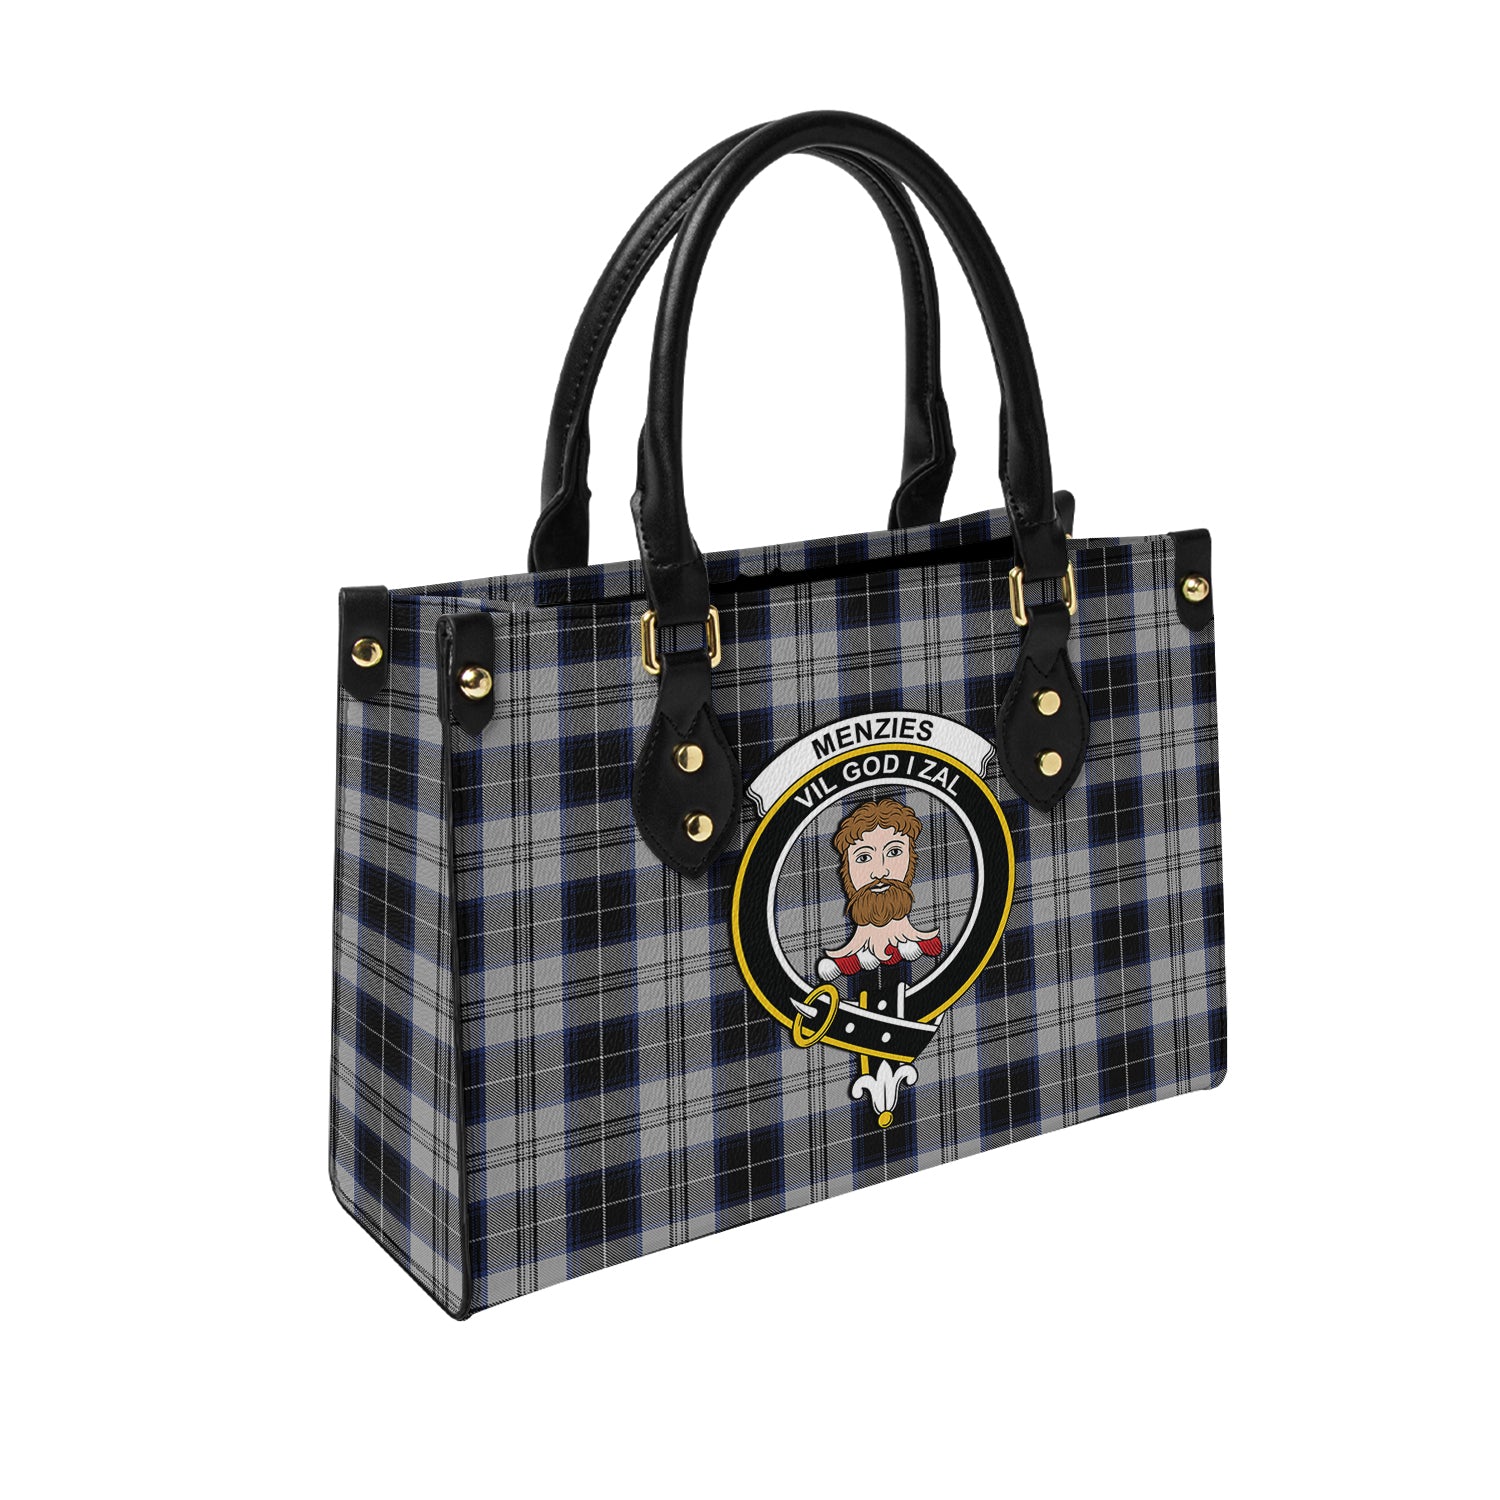 menzies-black-dress-tartan-leather-bag-with-family-crest